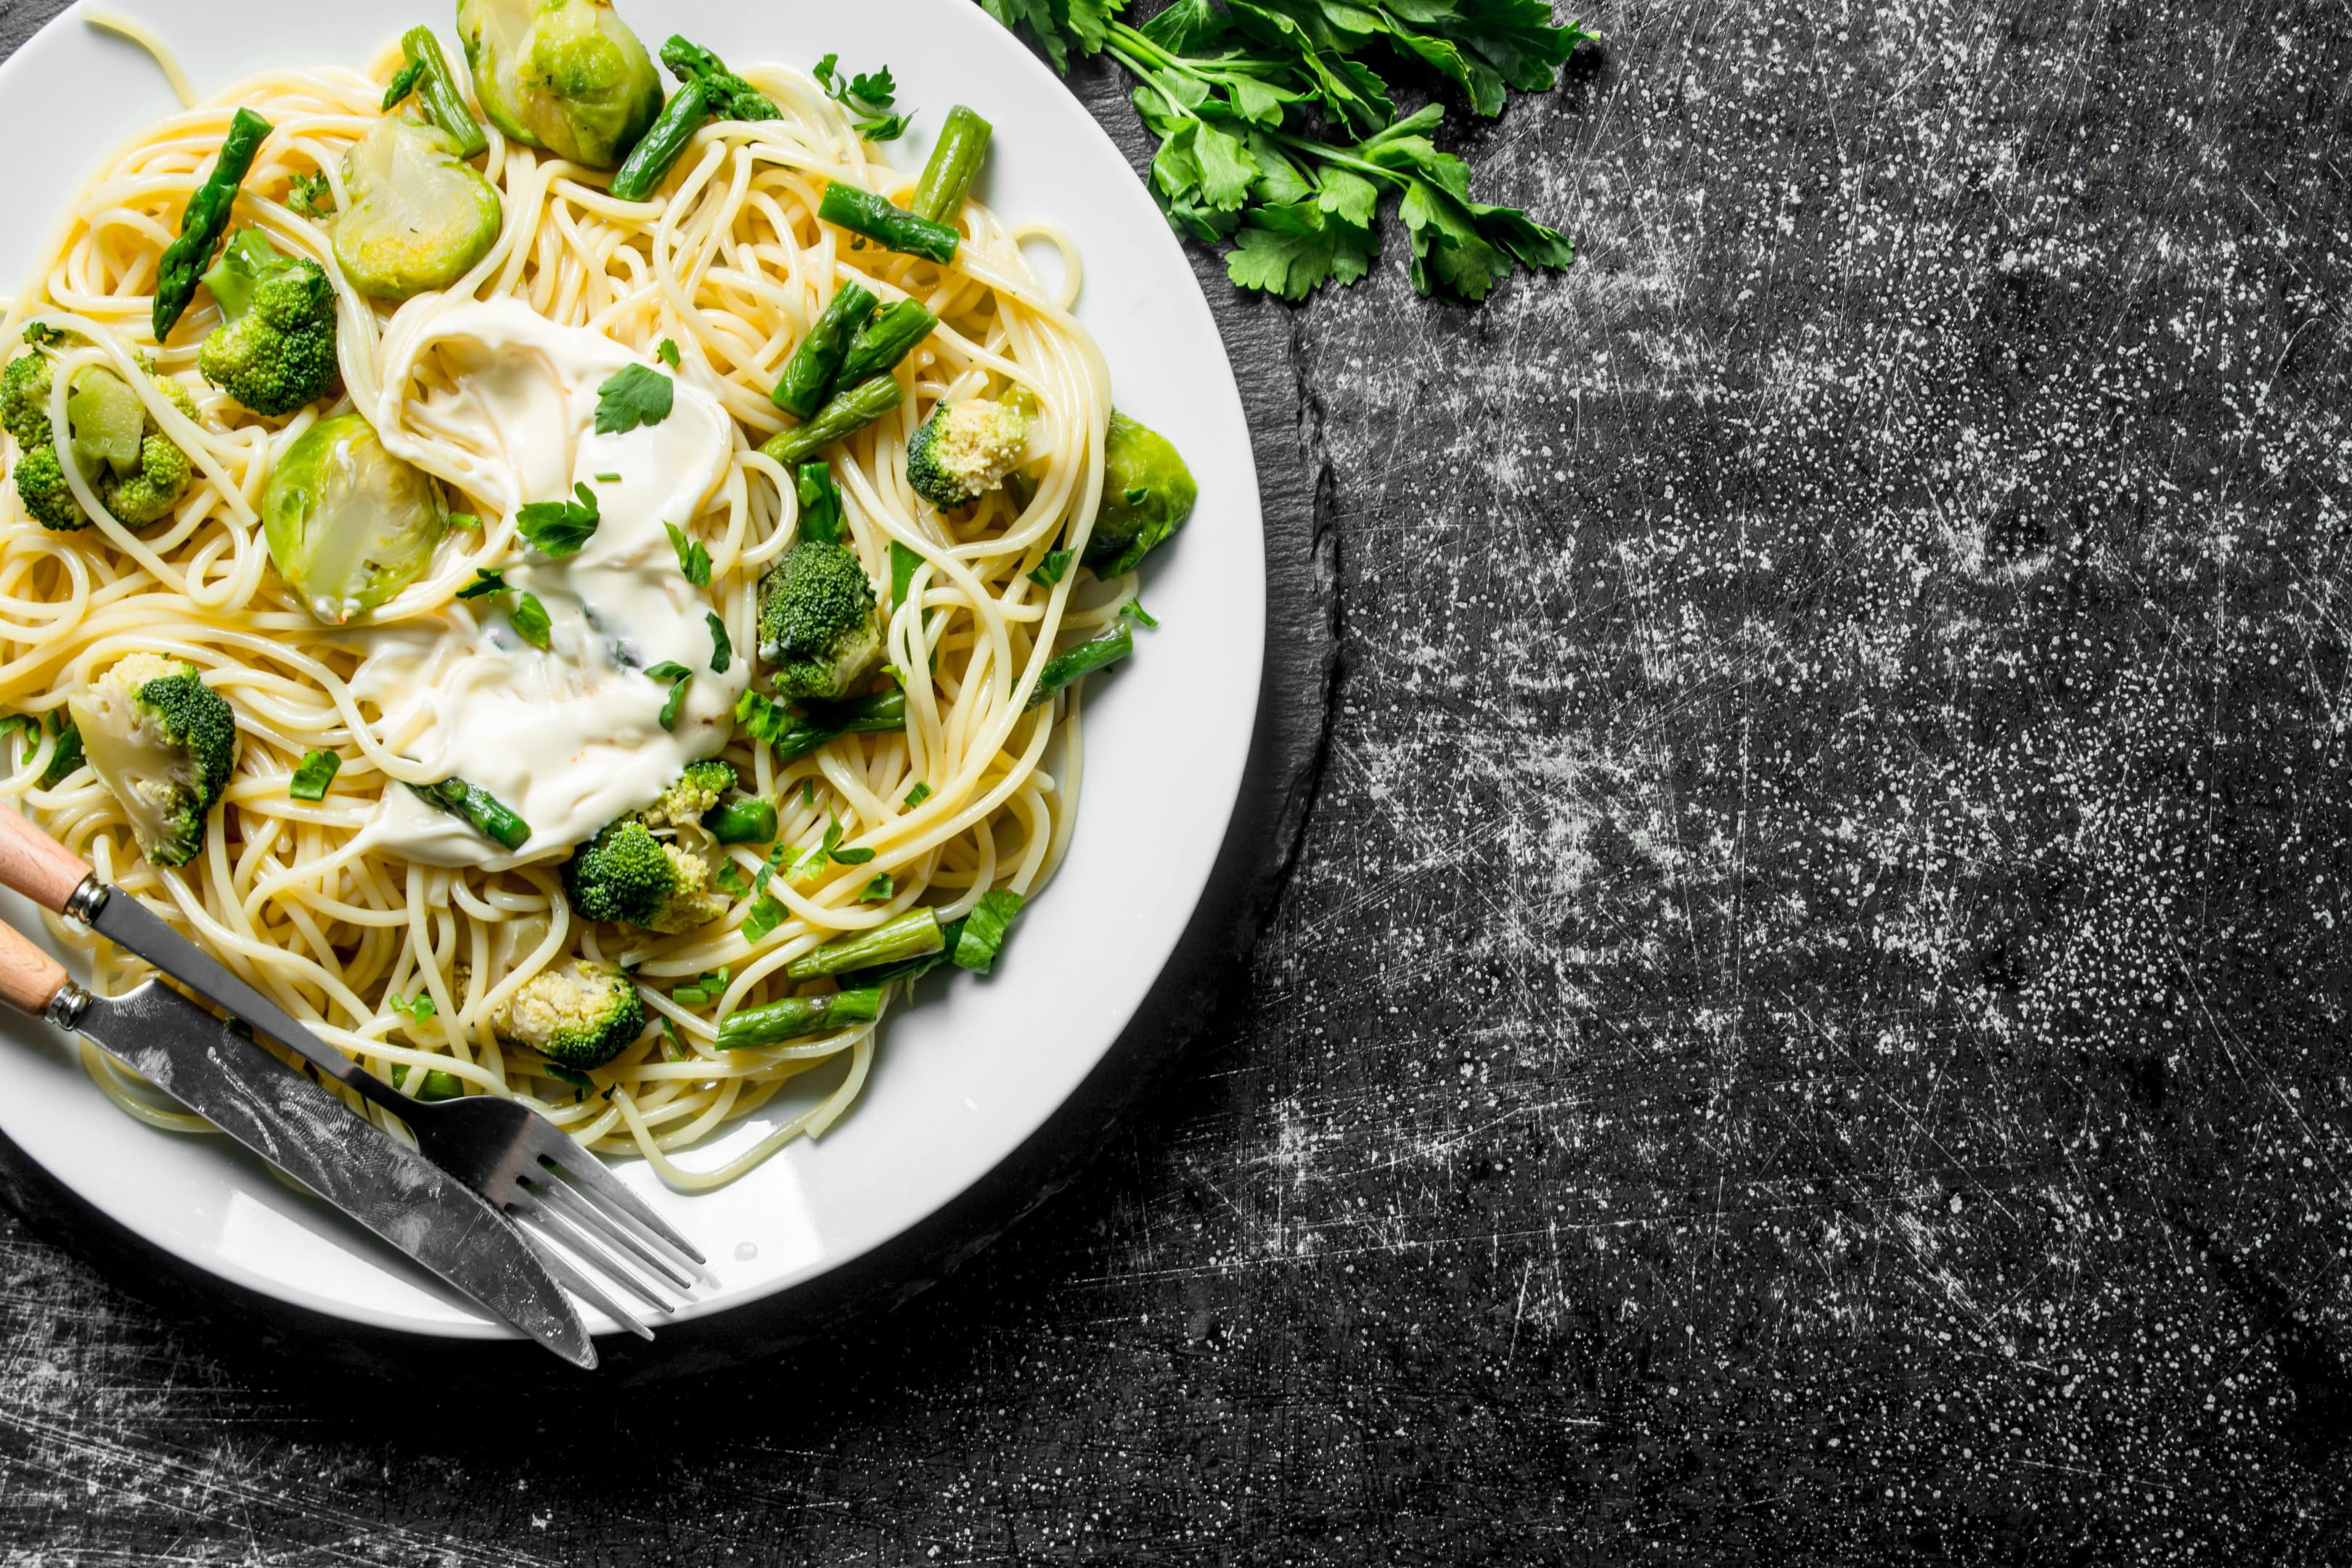 Pasta with broccoli, brussels sprouts and green beans on rustic table